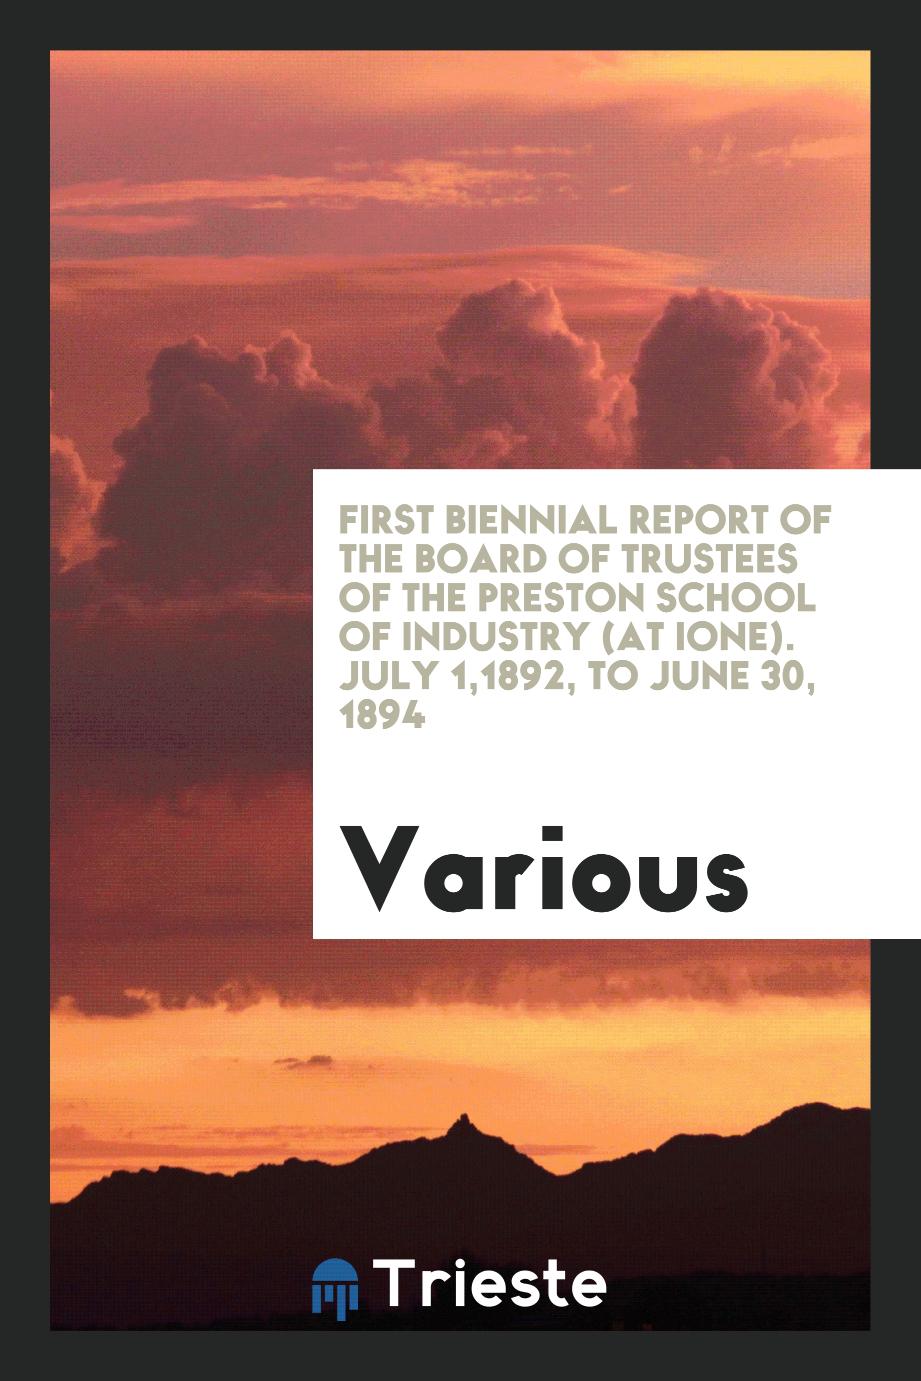 First Biennial Report of the Board of Trustees of the Preston School of Industry (at Ione). July 1,1892, to June 30, 1894